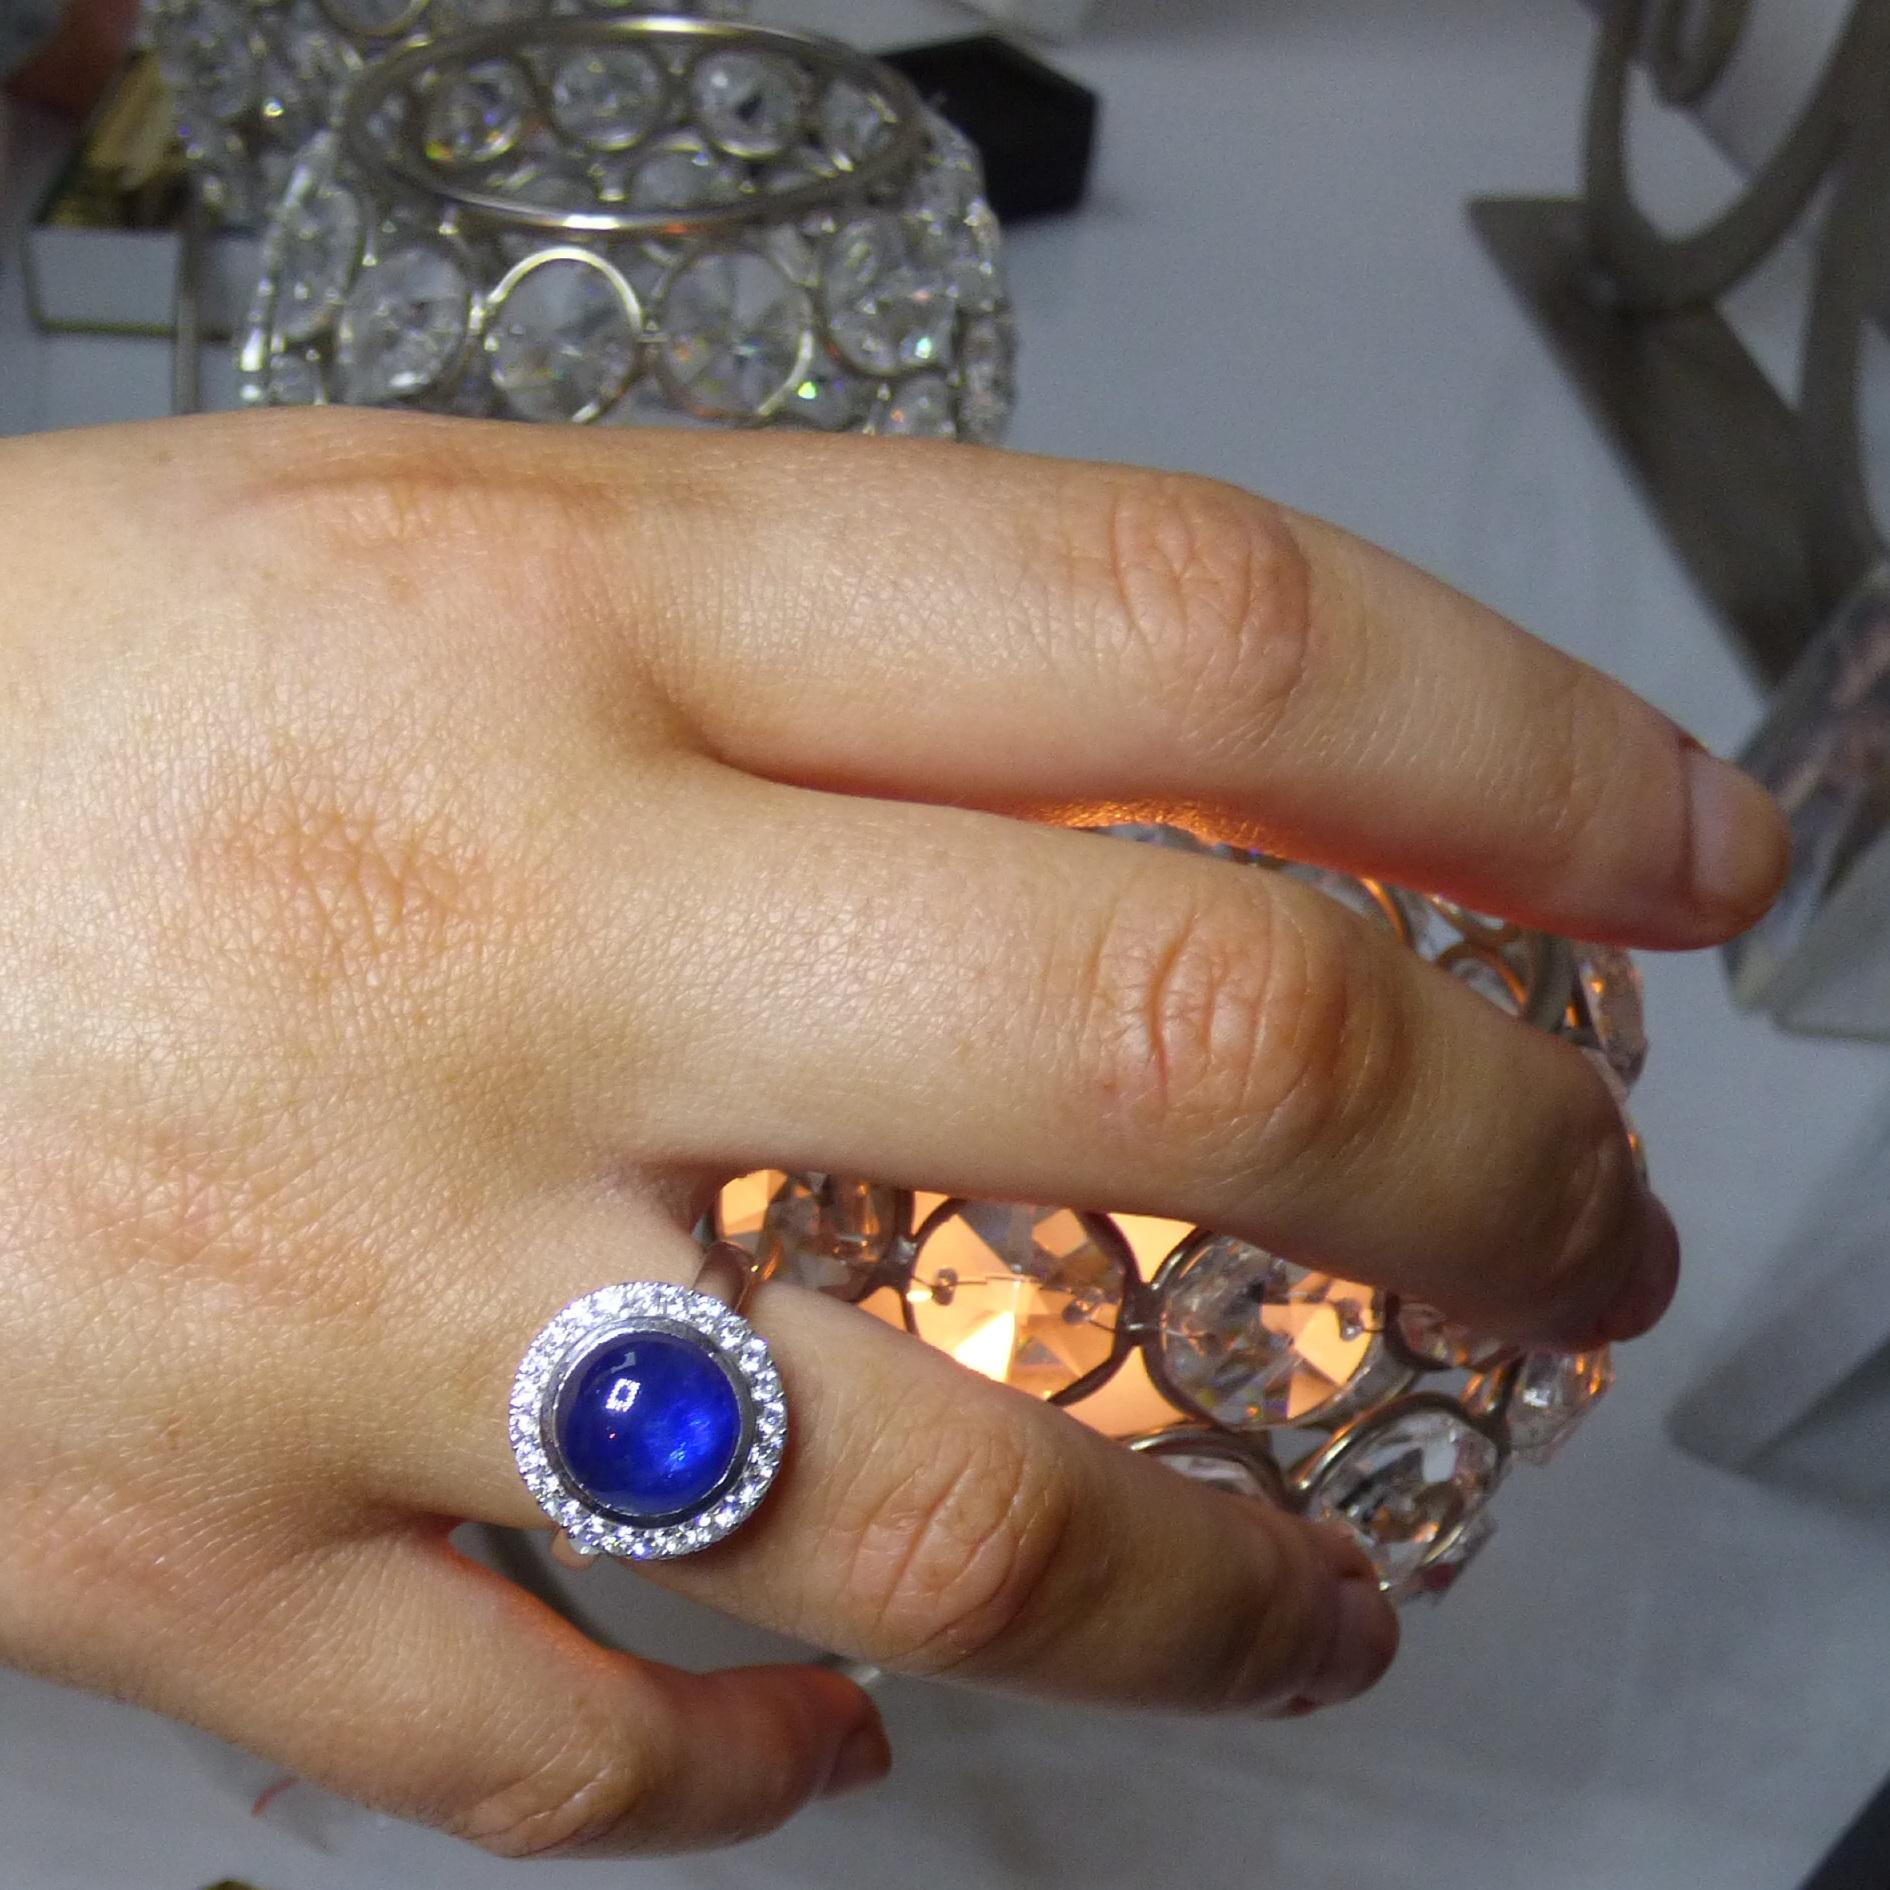 A colourful Cabochon Sapphire 9mm round (6.67ct.) is surrounded by 24 Diamonds (.43ct.). The ring is handmade in 14K white gold.  The ring is hallmarked by the Dublin Assay Office.
As noted in the photos, this cabochon Sapphire stands out with